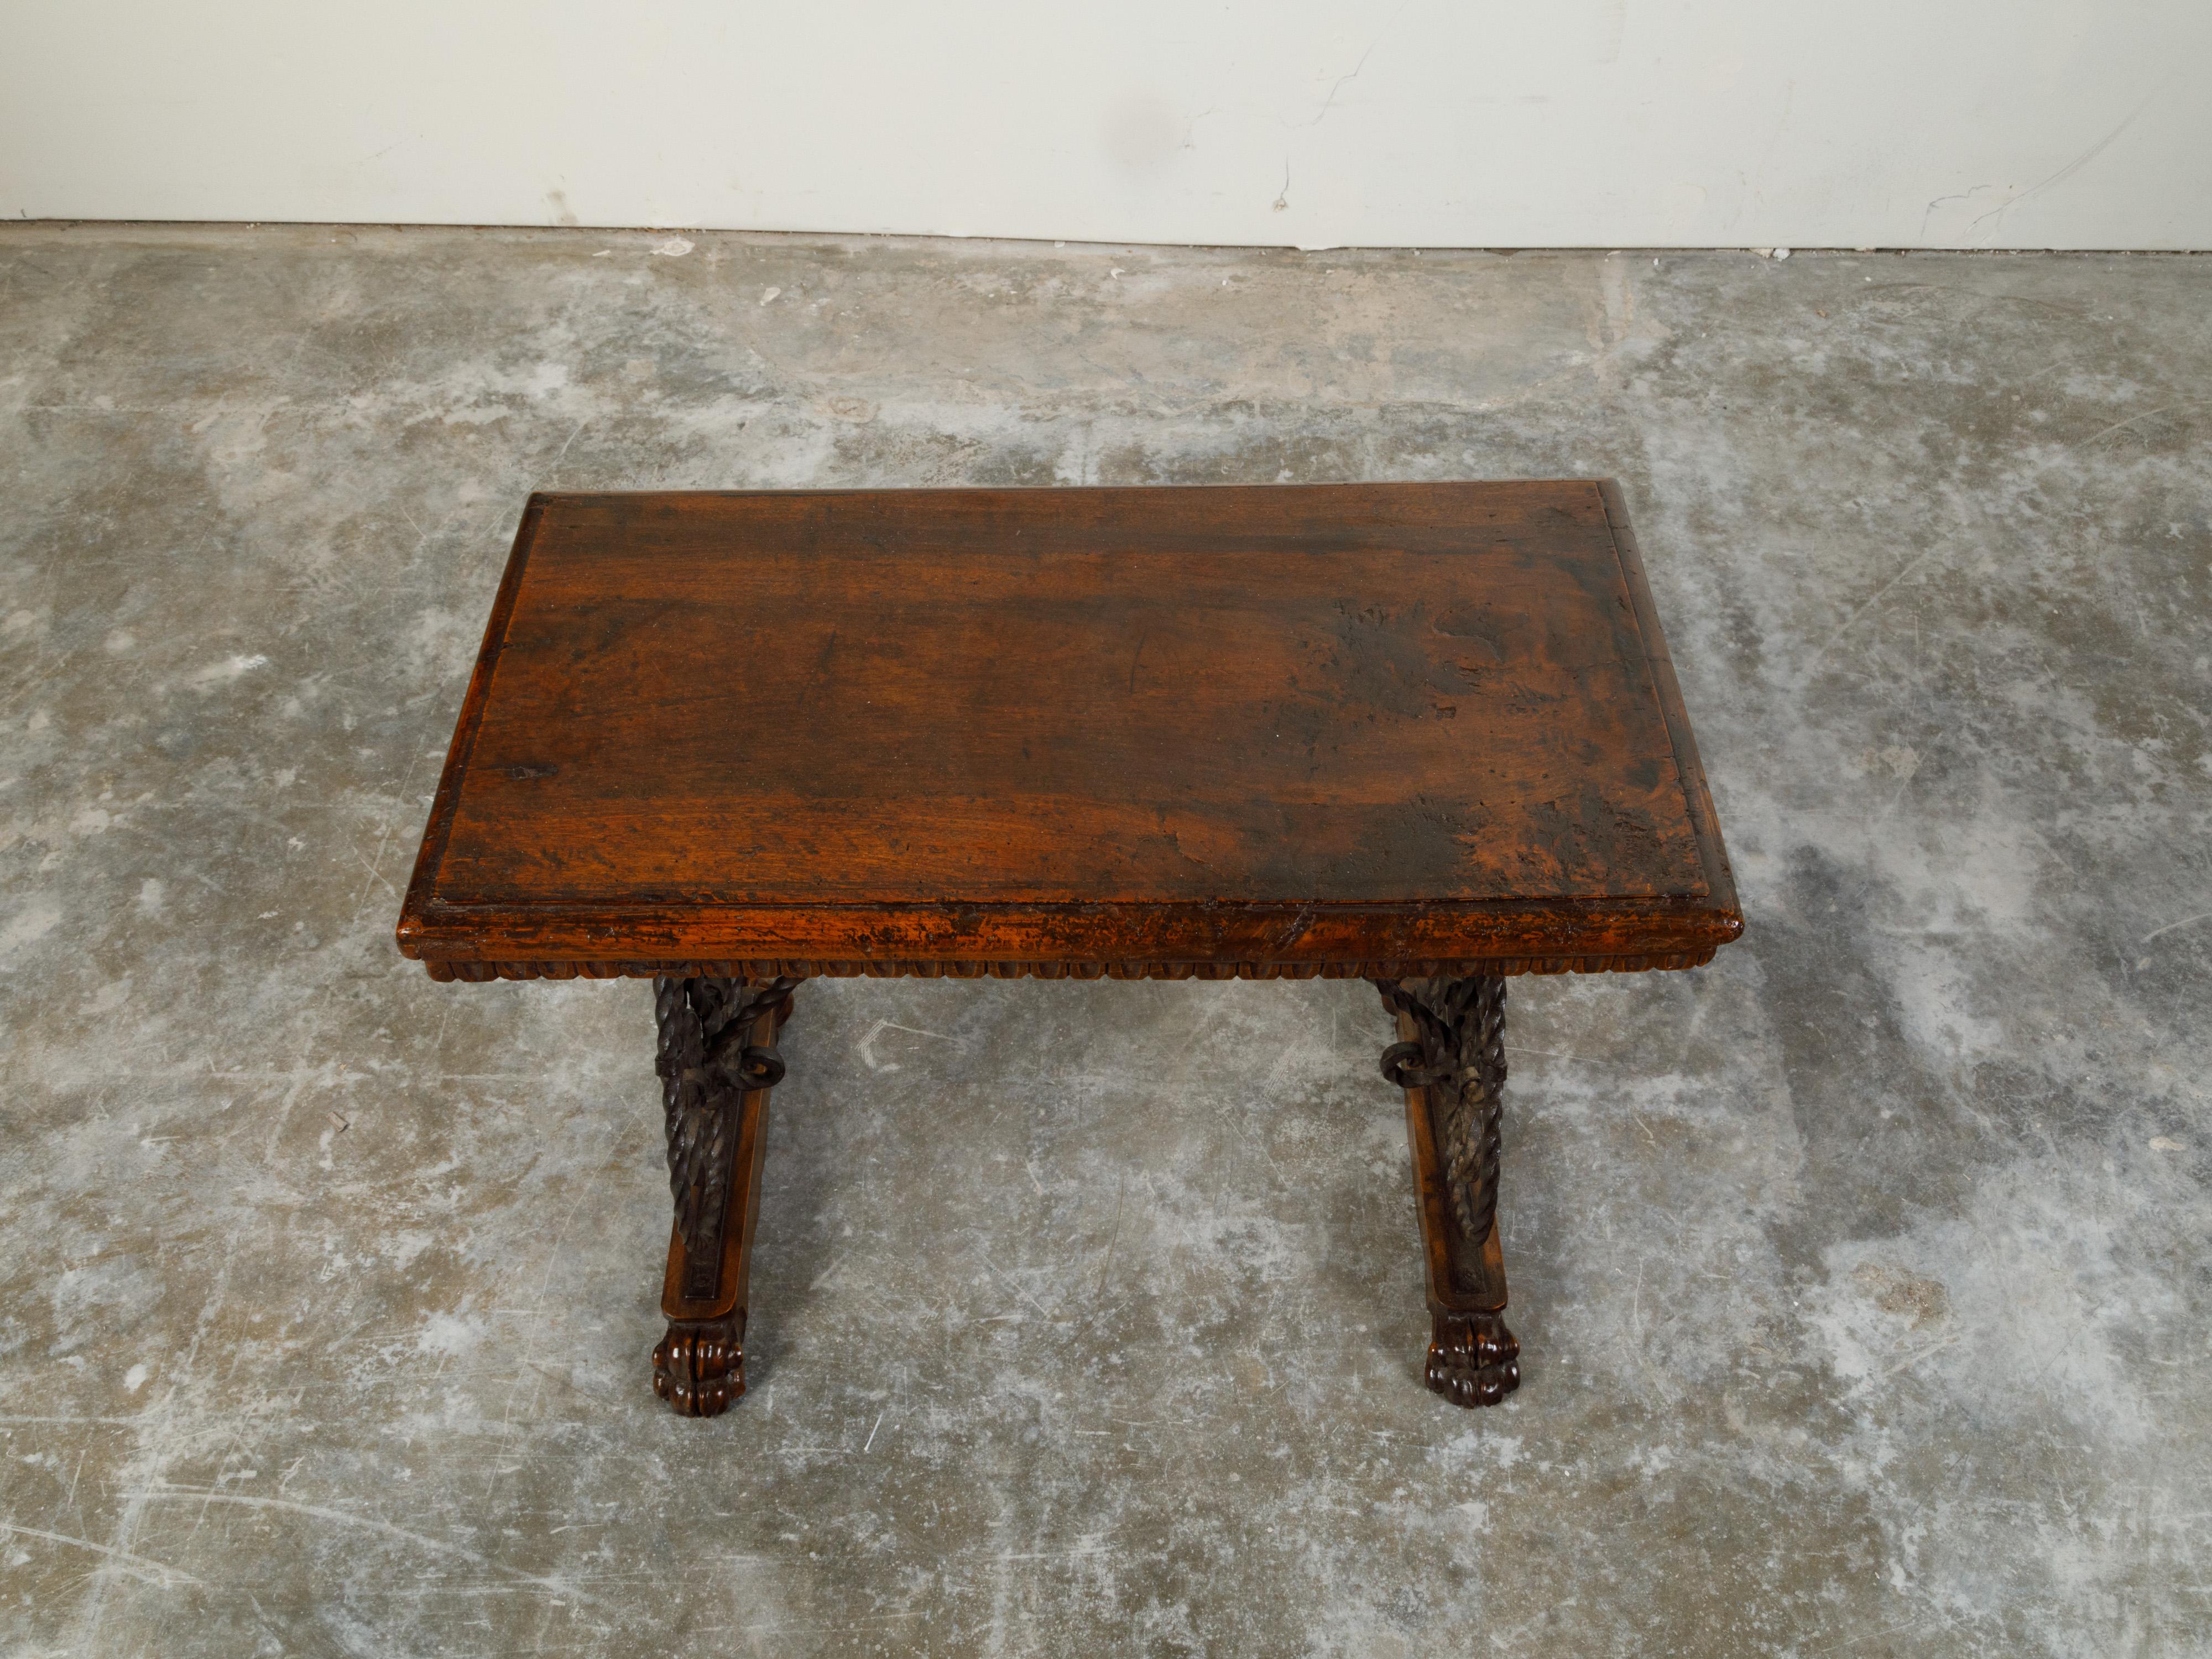 Italian 1900s Walnut Top Console Table with Iron Base and Fleur de Lys Motifs For Sale 7